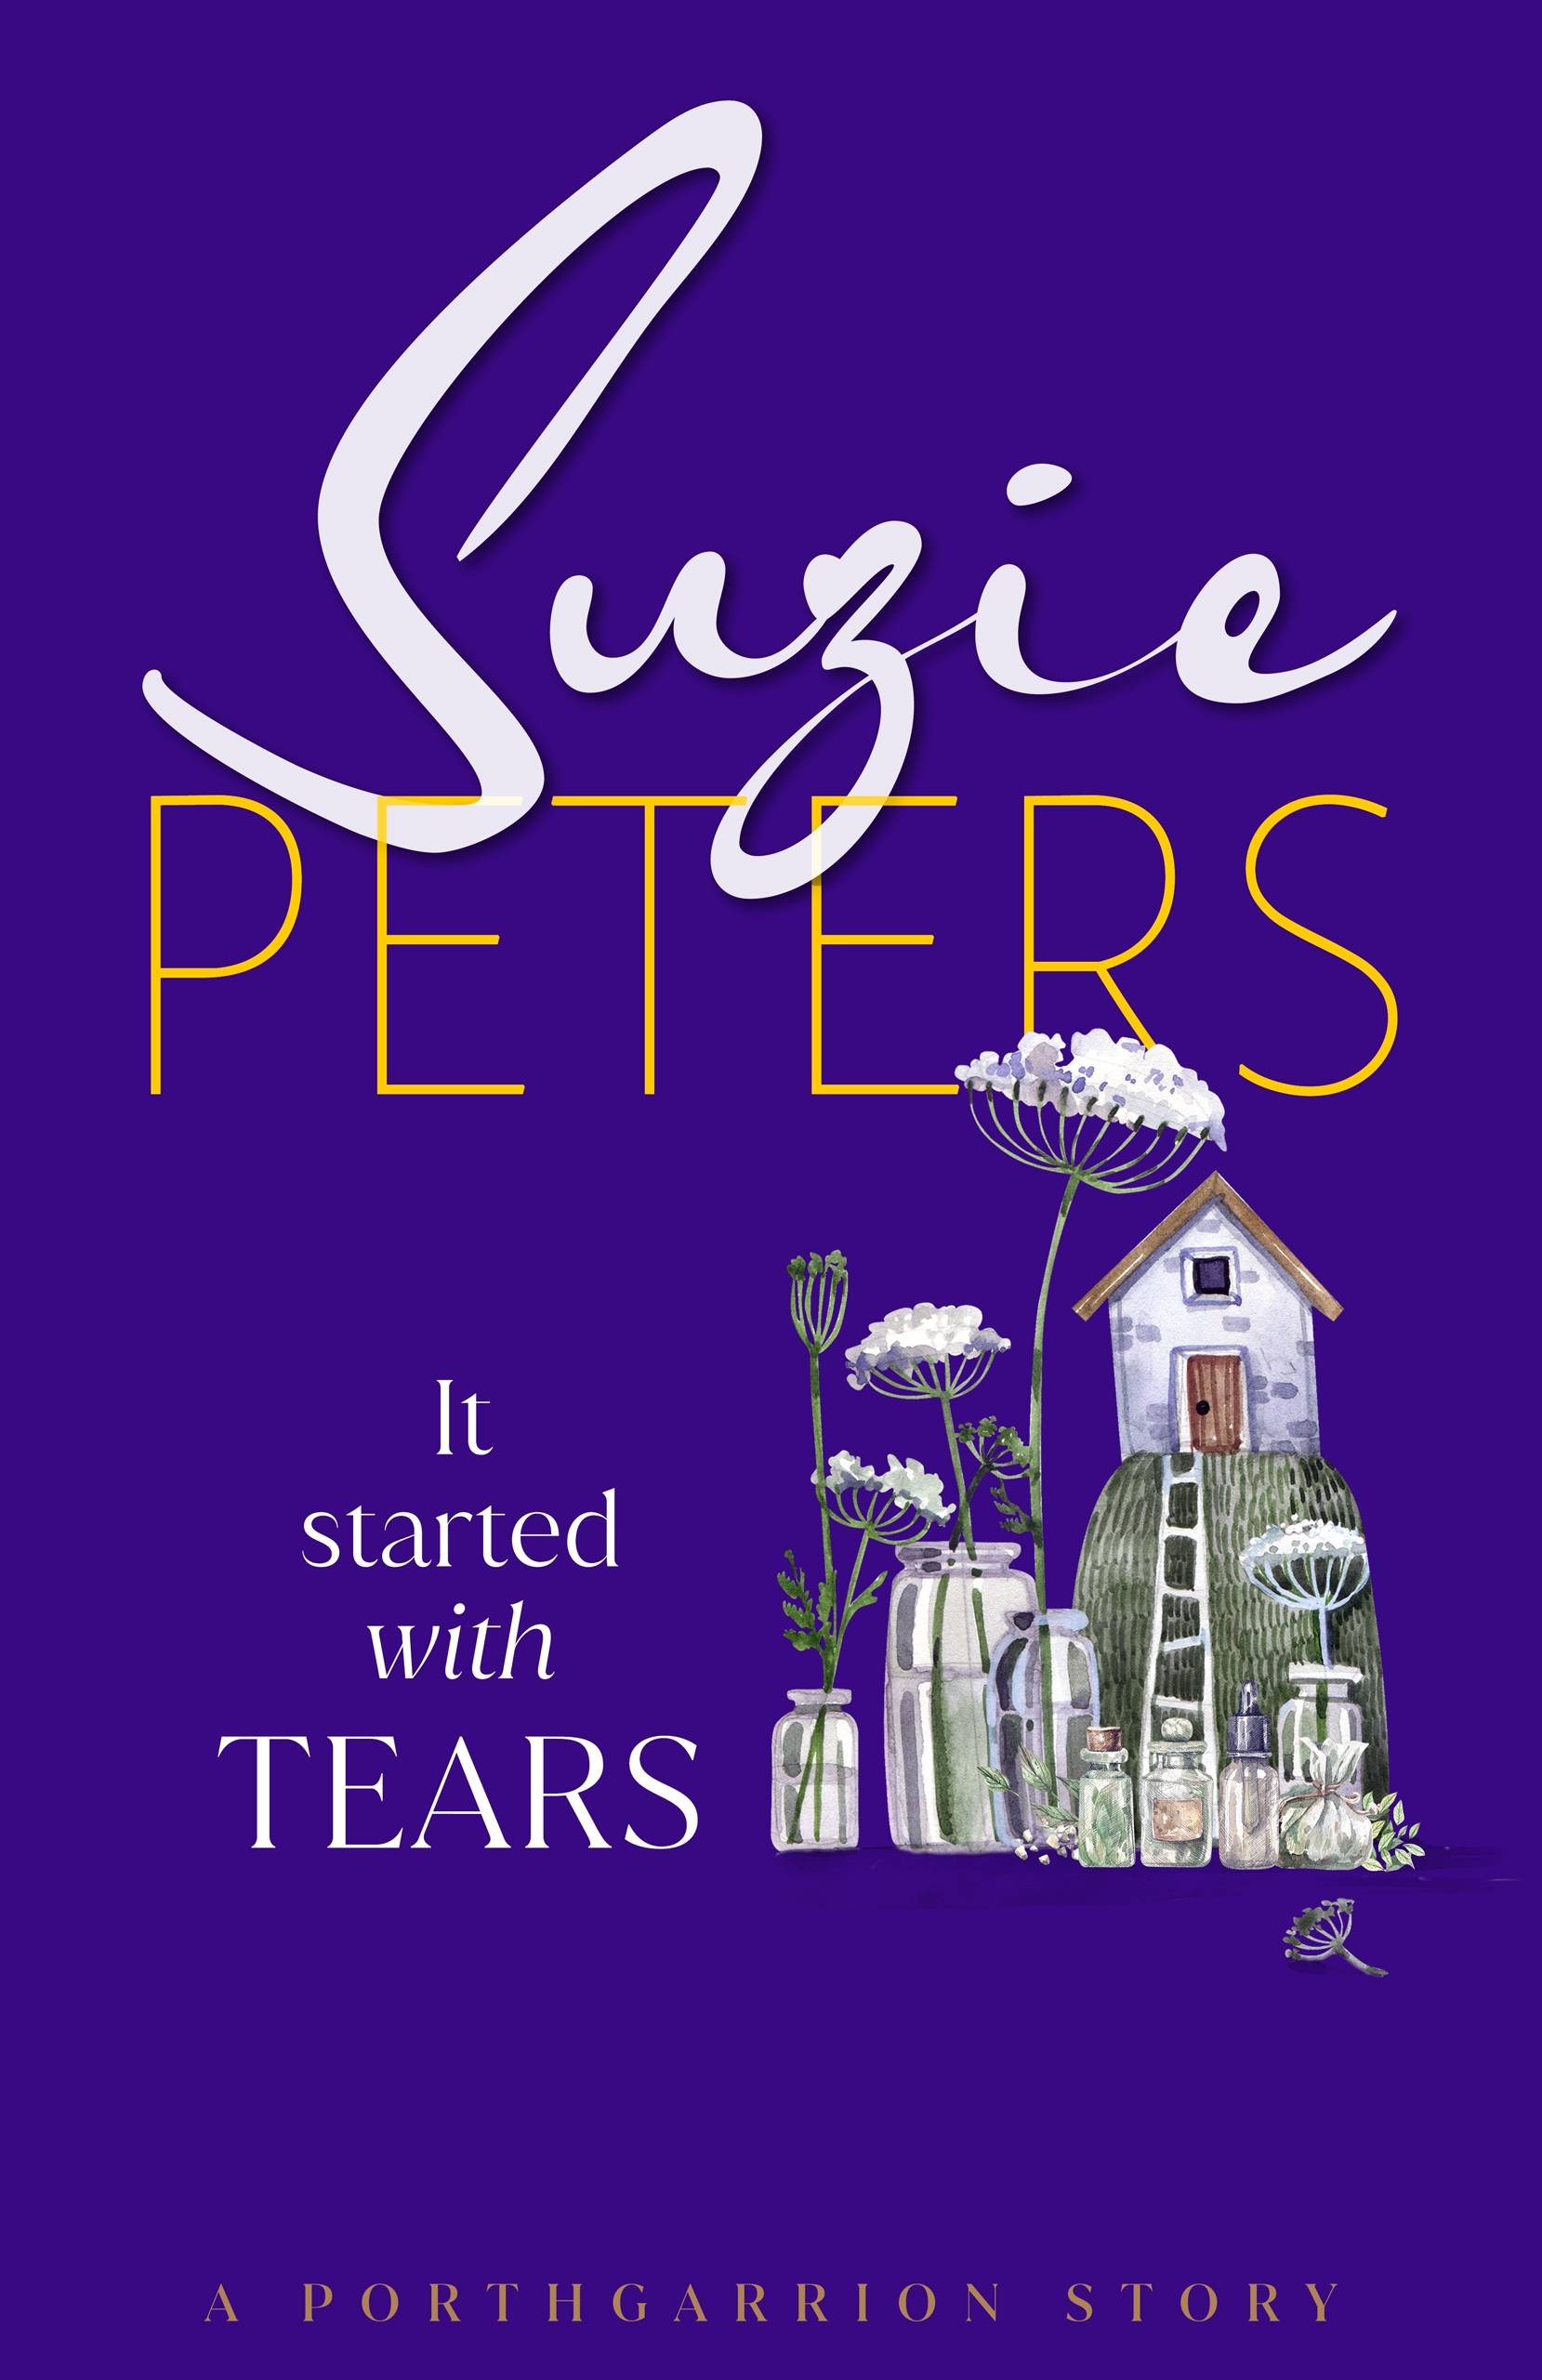 Porthgarrion Series: It Started with Tears by Suzie Peters.